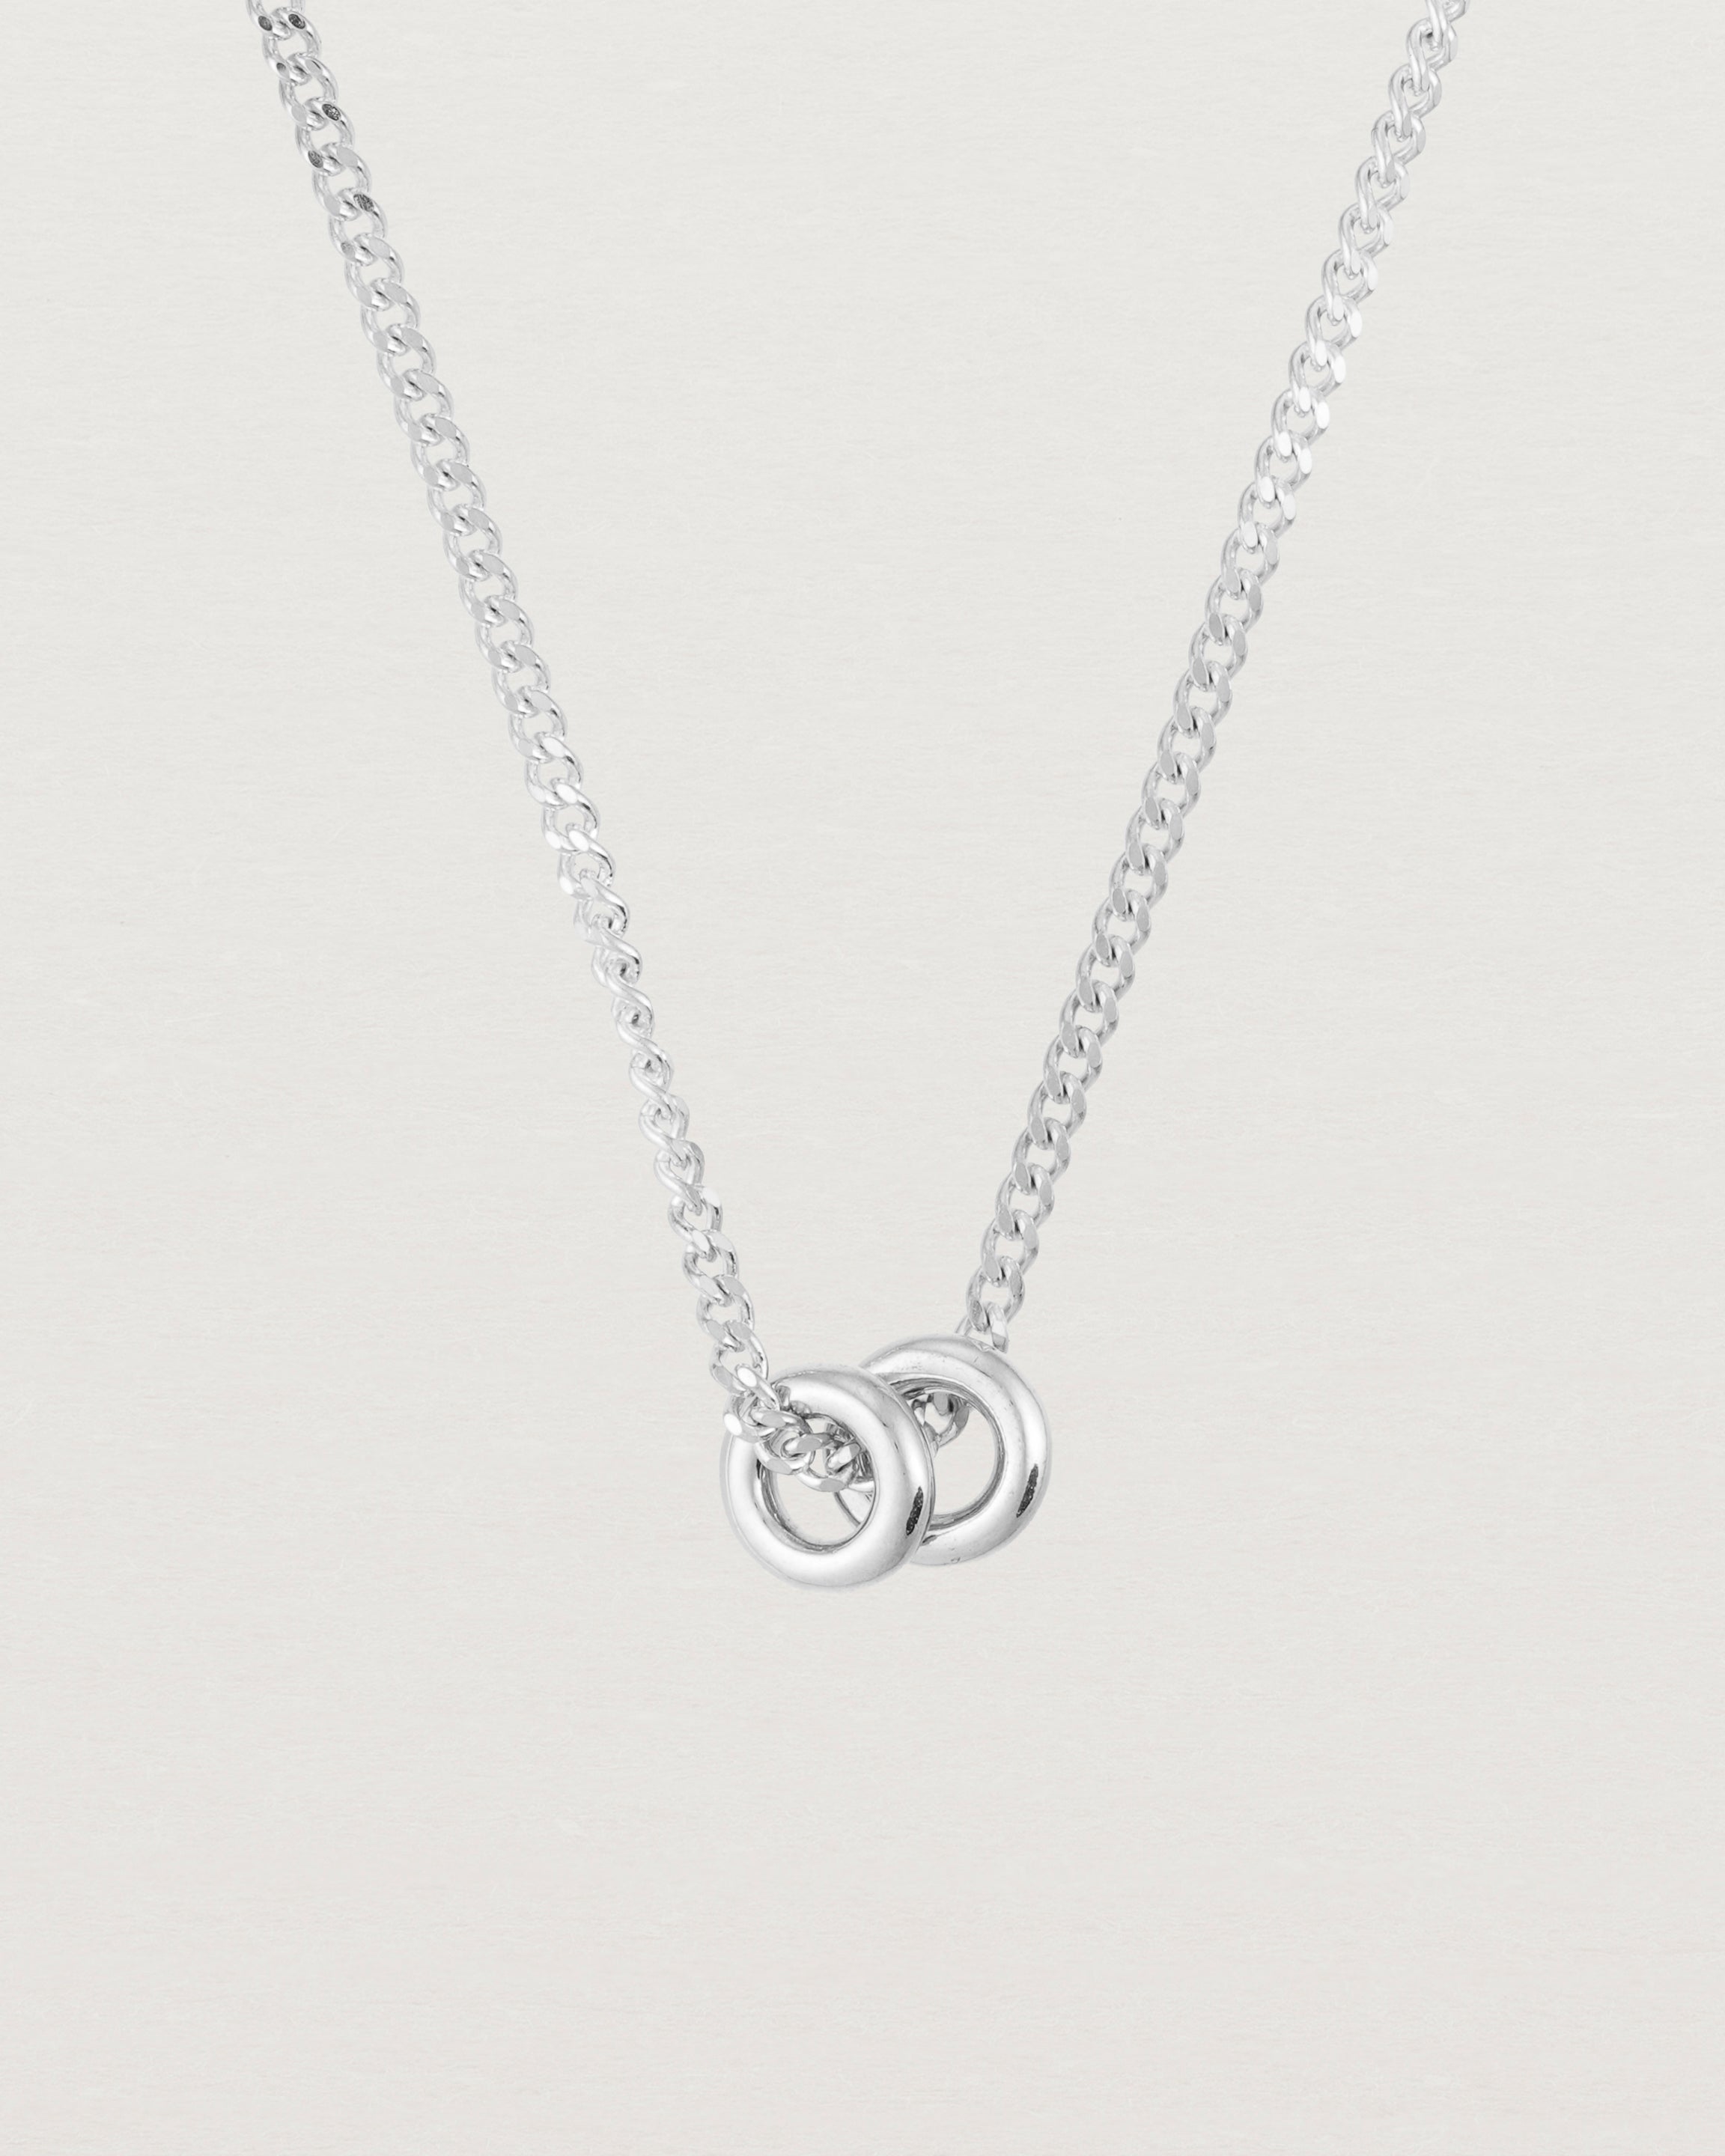 Close up of Aether necklace in white gold with two round charms